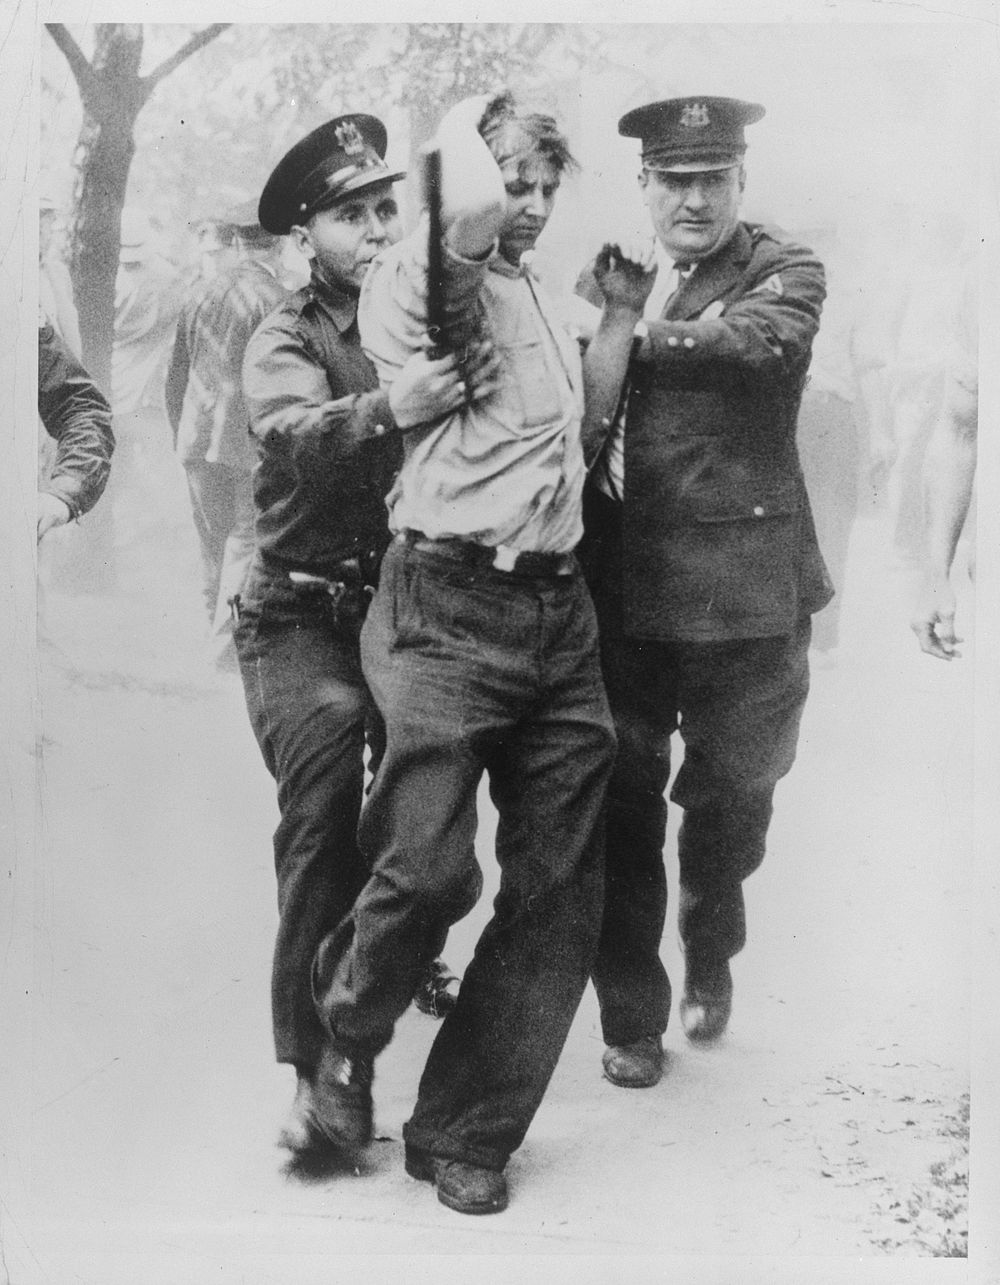 [Untitled photo, possibly related to: Detroit, Michigan. Police officers removing sit-down strikers from the Yale and Towne…